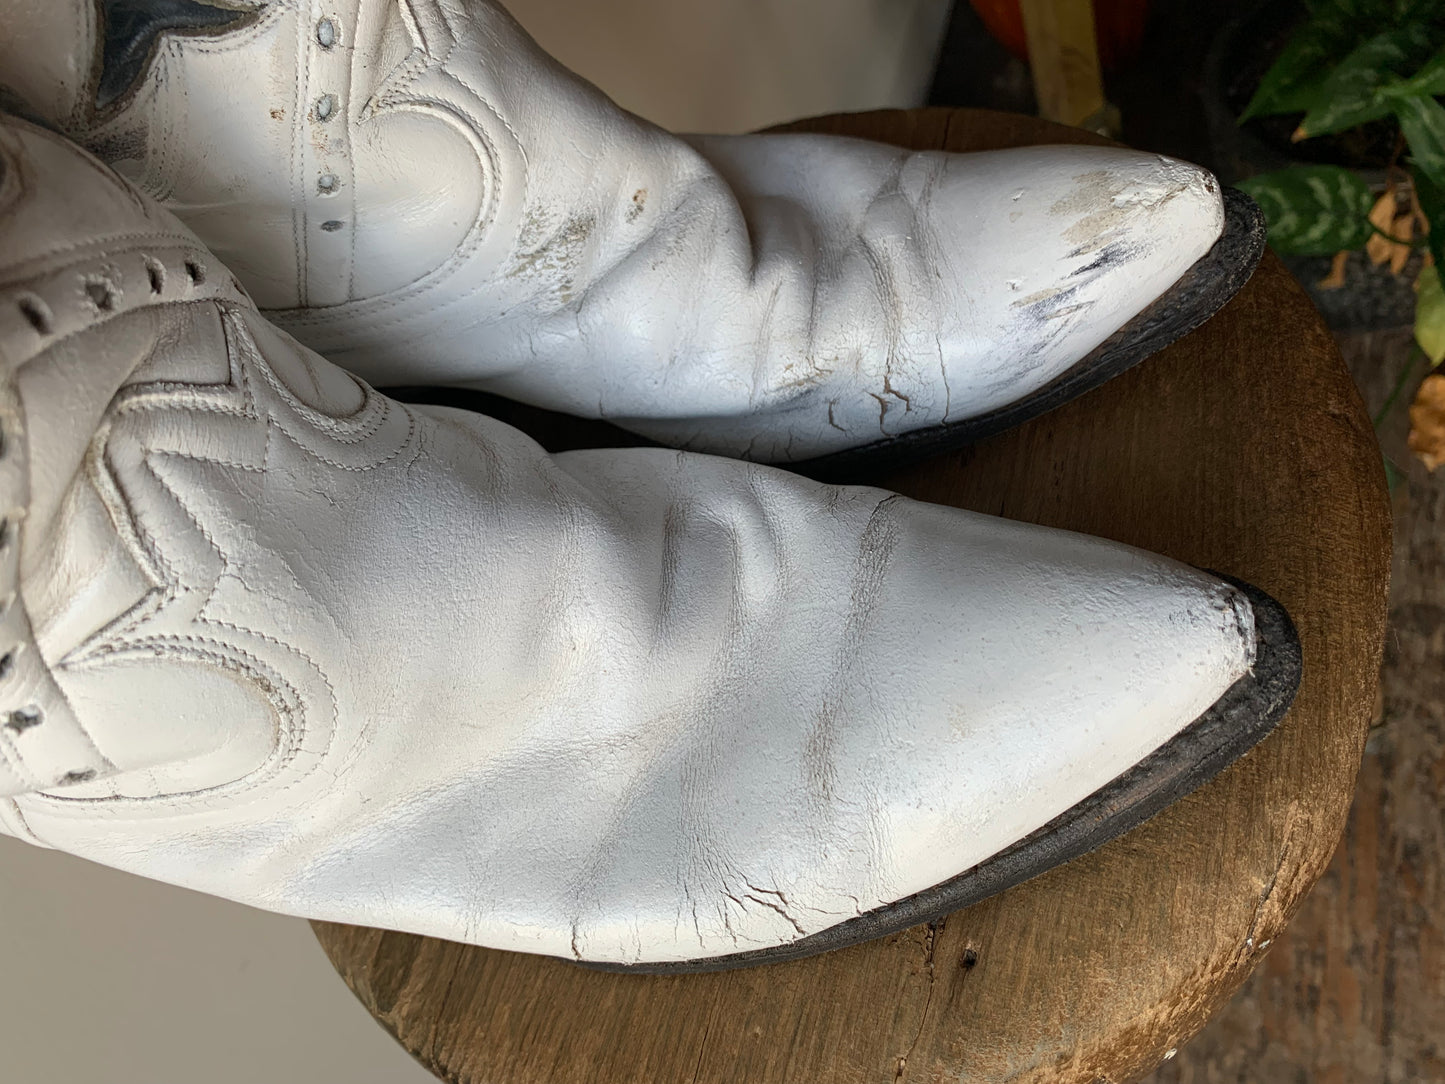 W9 1950s White Cowboy Boots with Navy Western Inlay / women's- as is